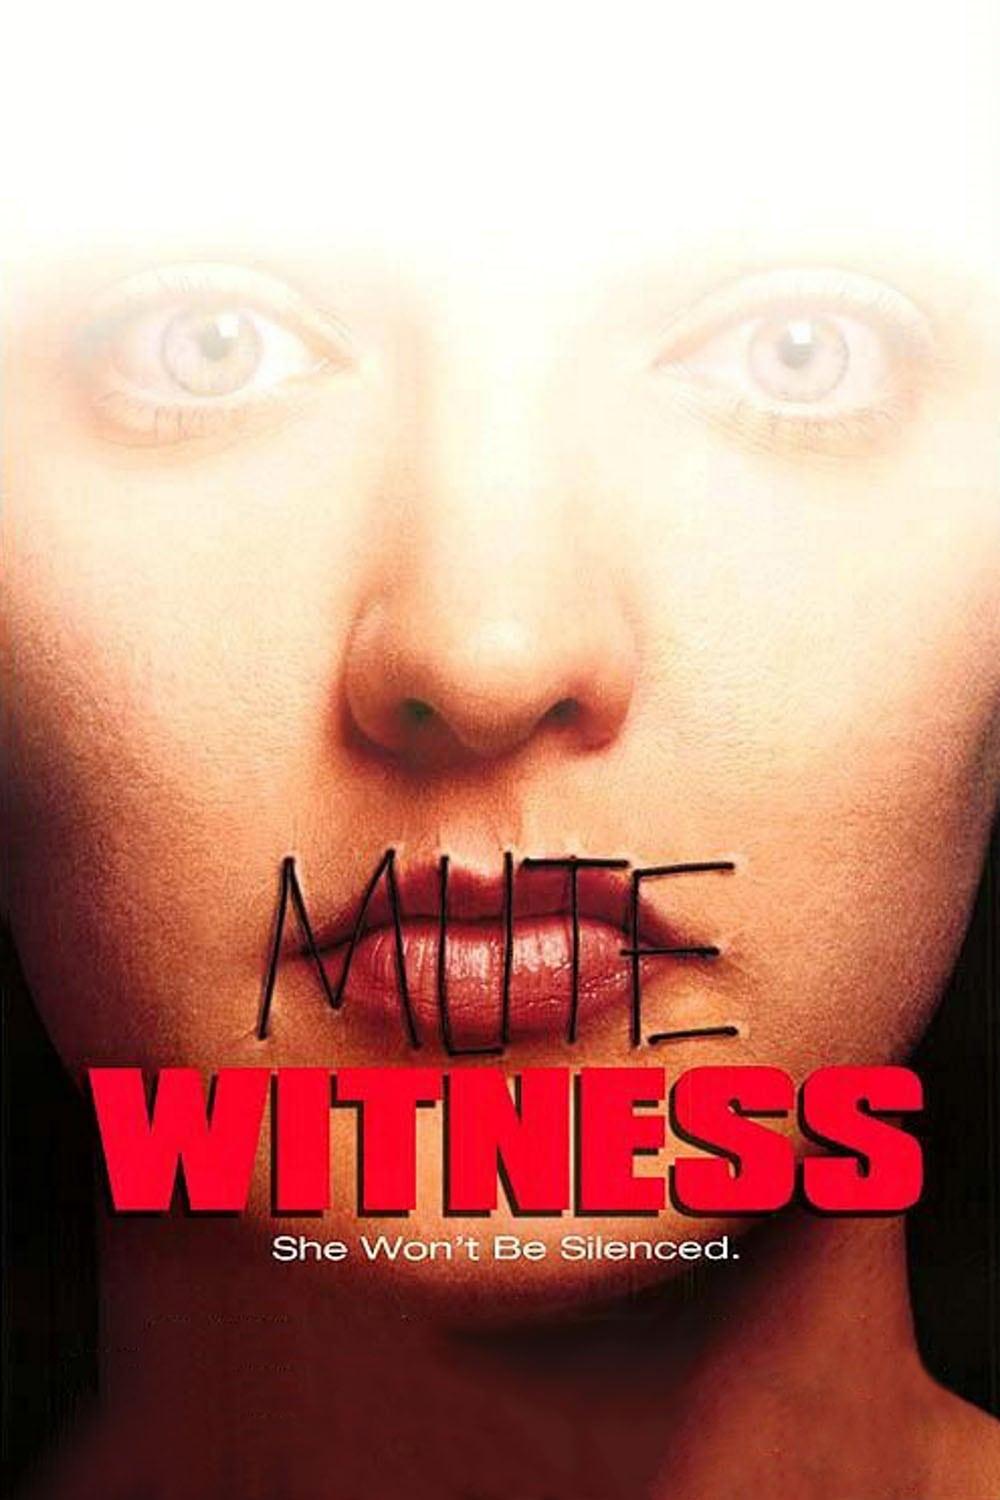 Mute Witness poster